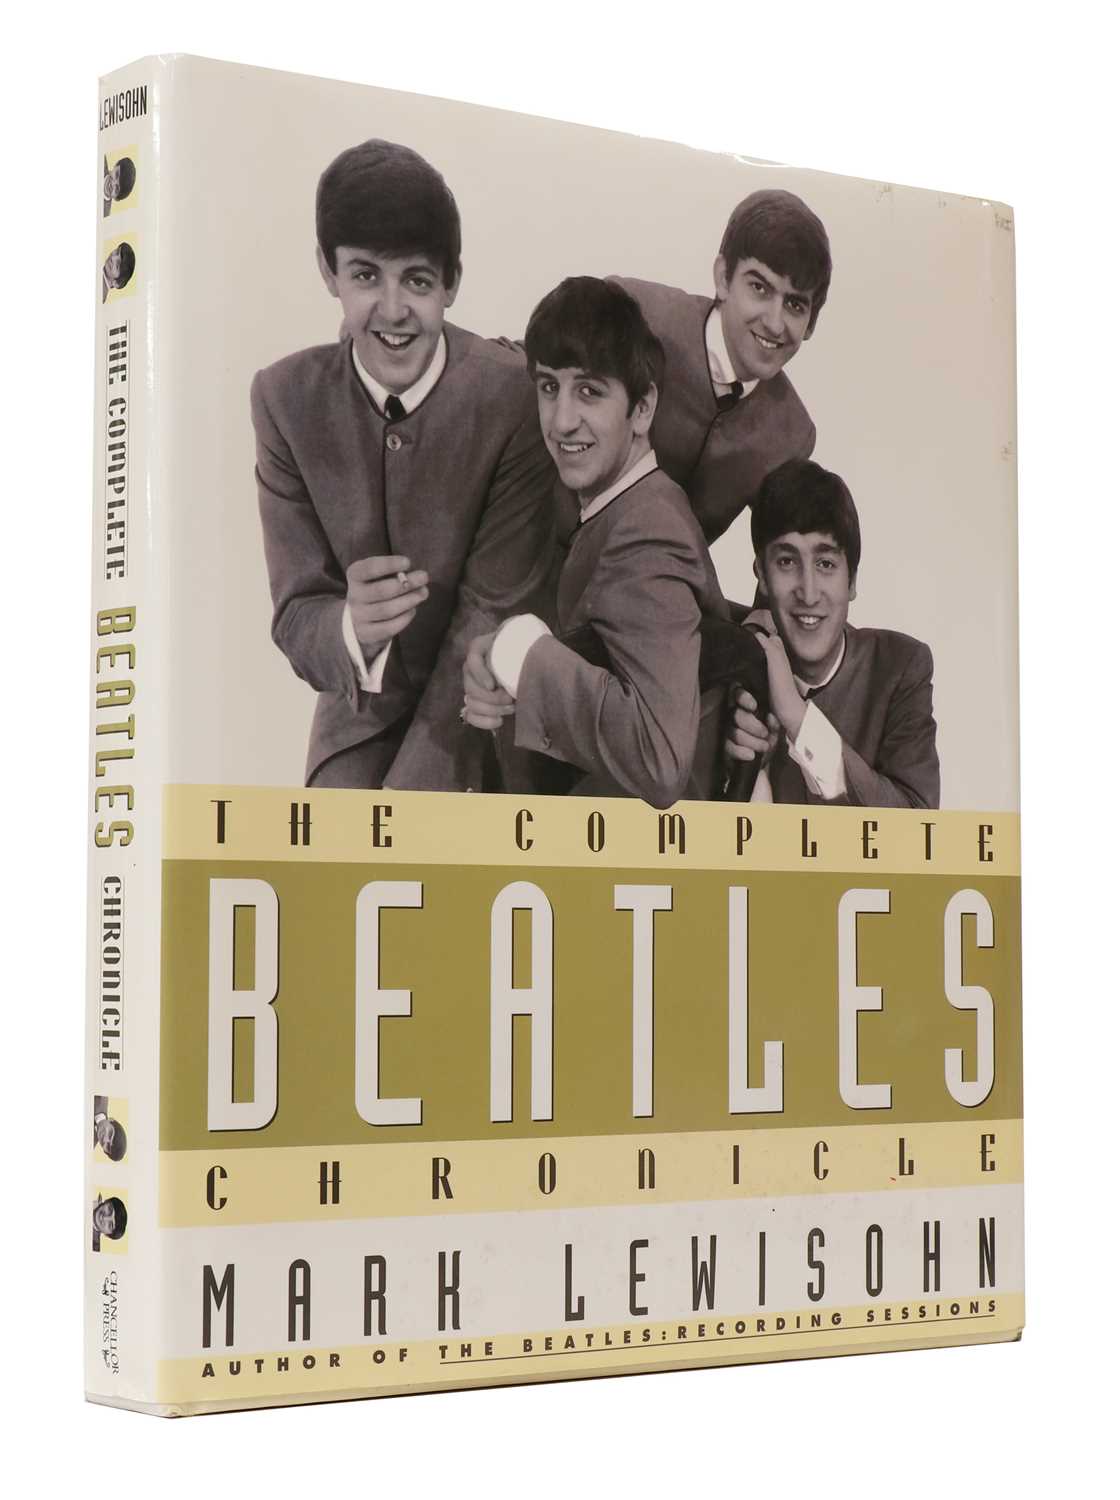 The BEATLES: 1- - Image 4 of 8